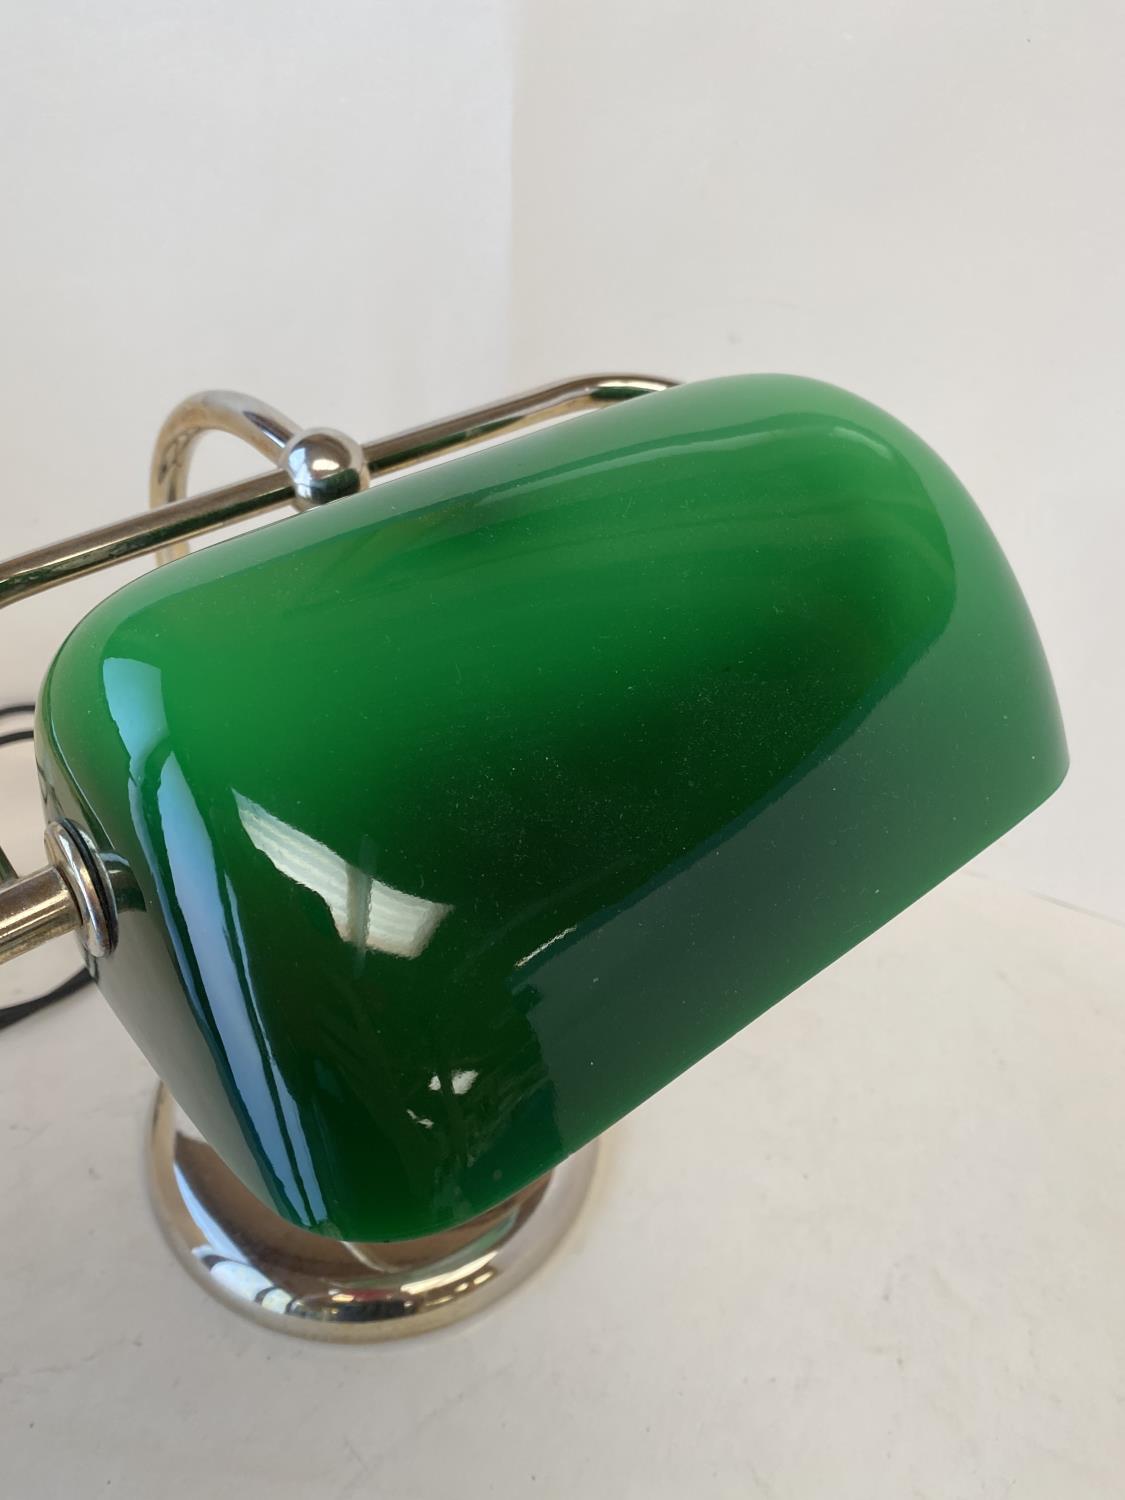 Brass desk lamp with green glass shade - Image 3 of 3